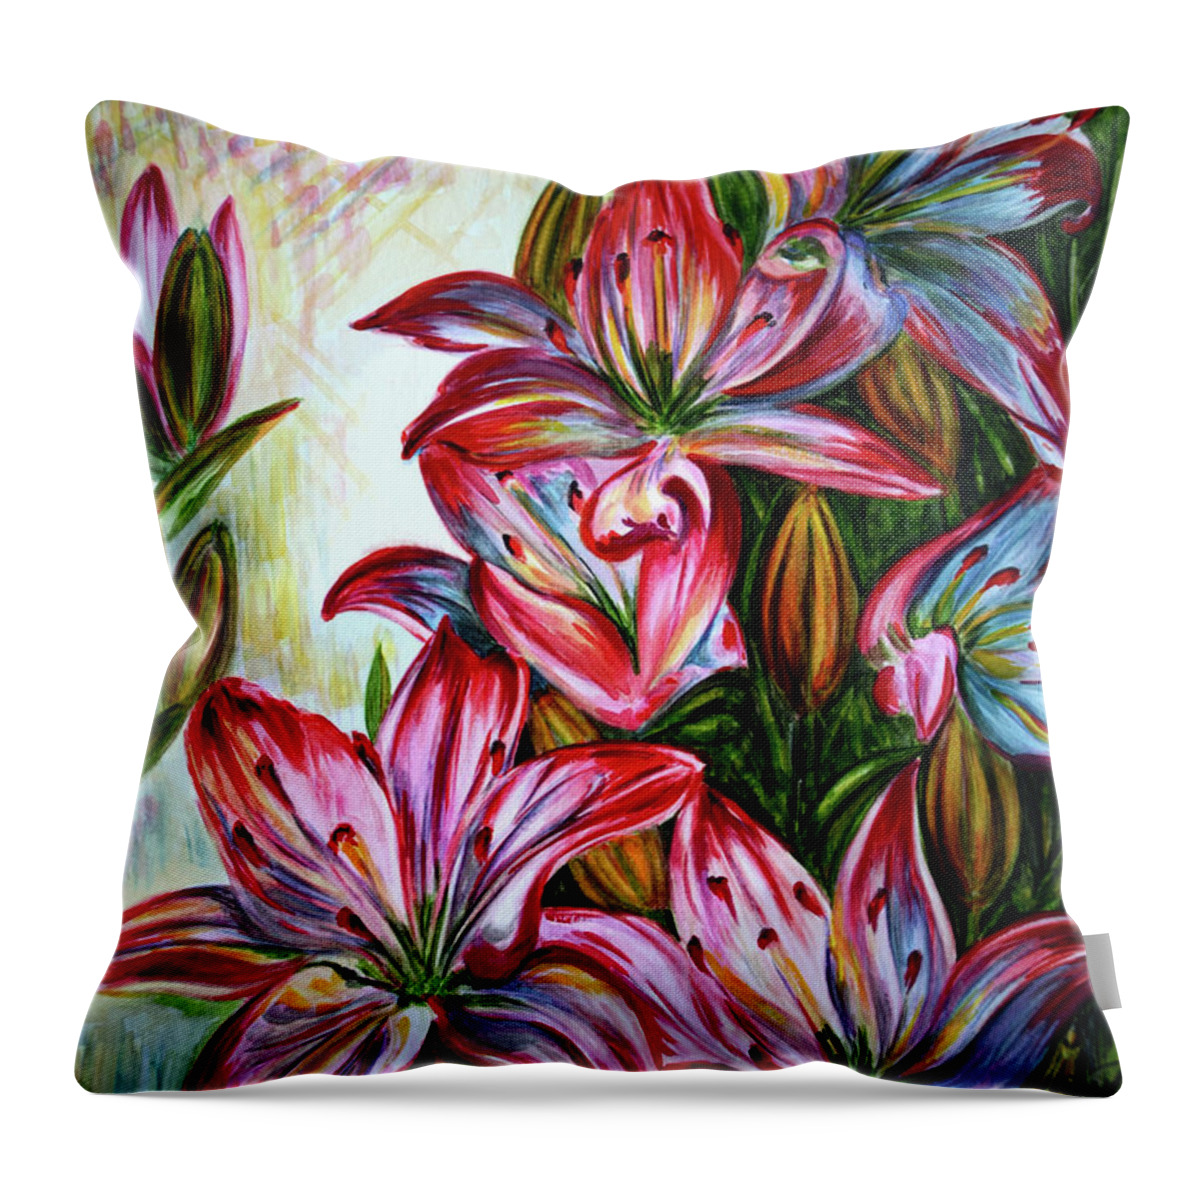 Lilies Throw Pillow featuring the painting Lilies by Harsh Malik